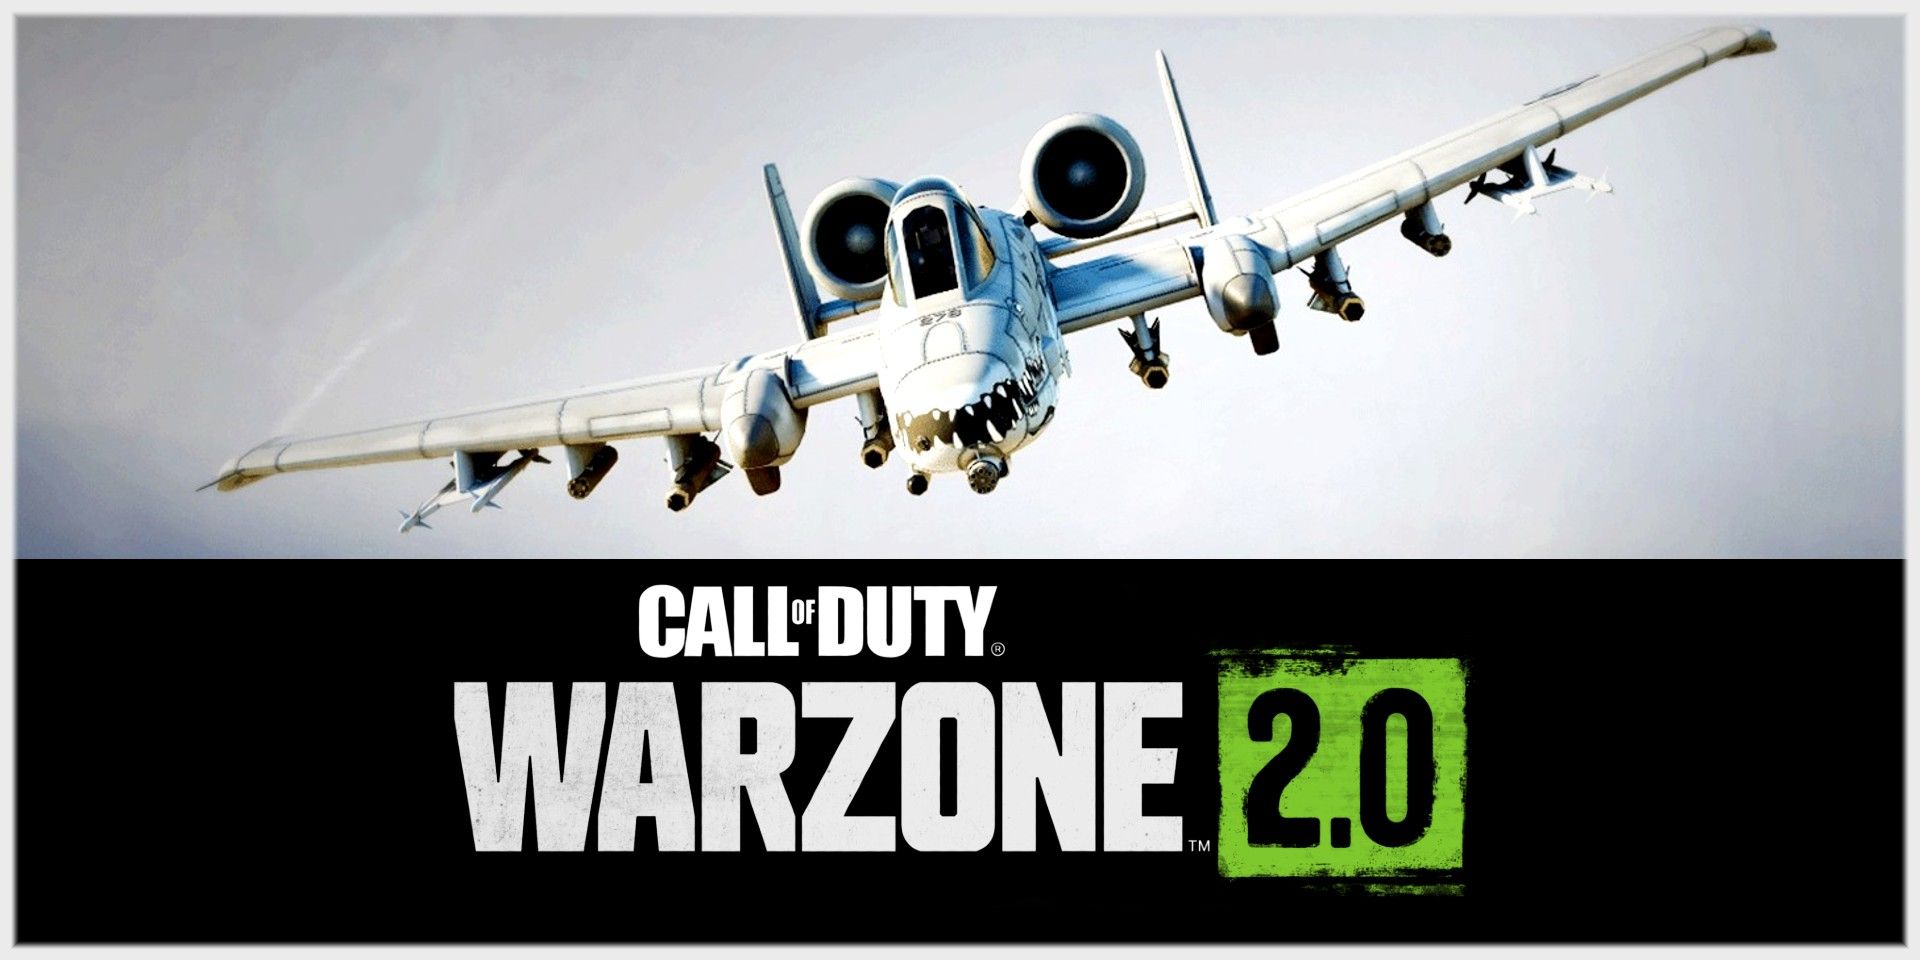 An Airplane used for Precision Strikes from Warzone 2.0